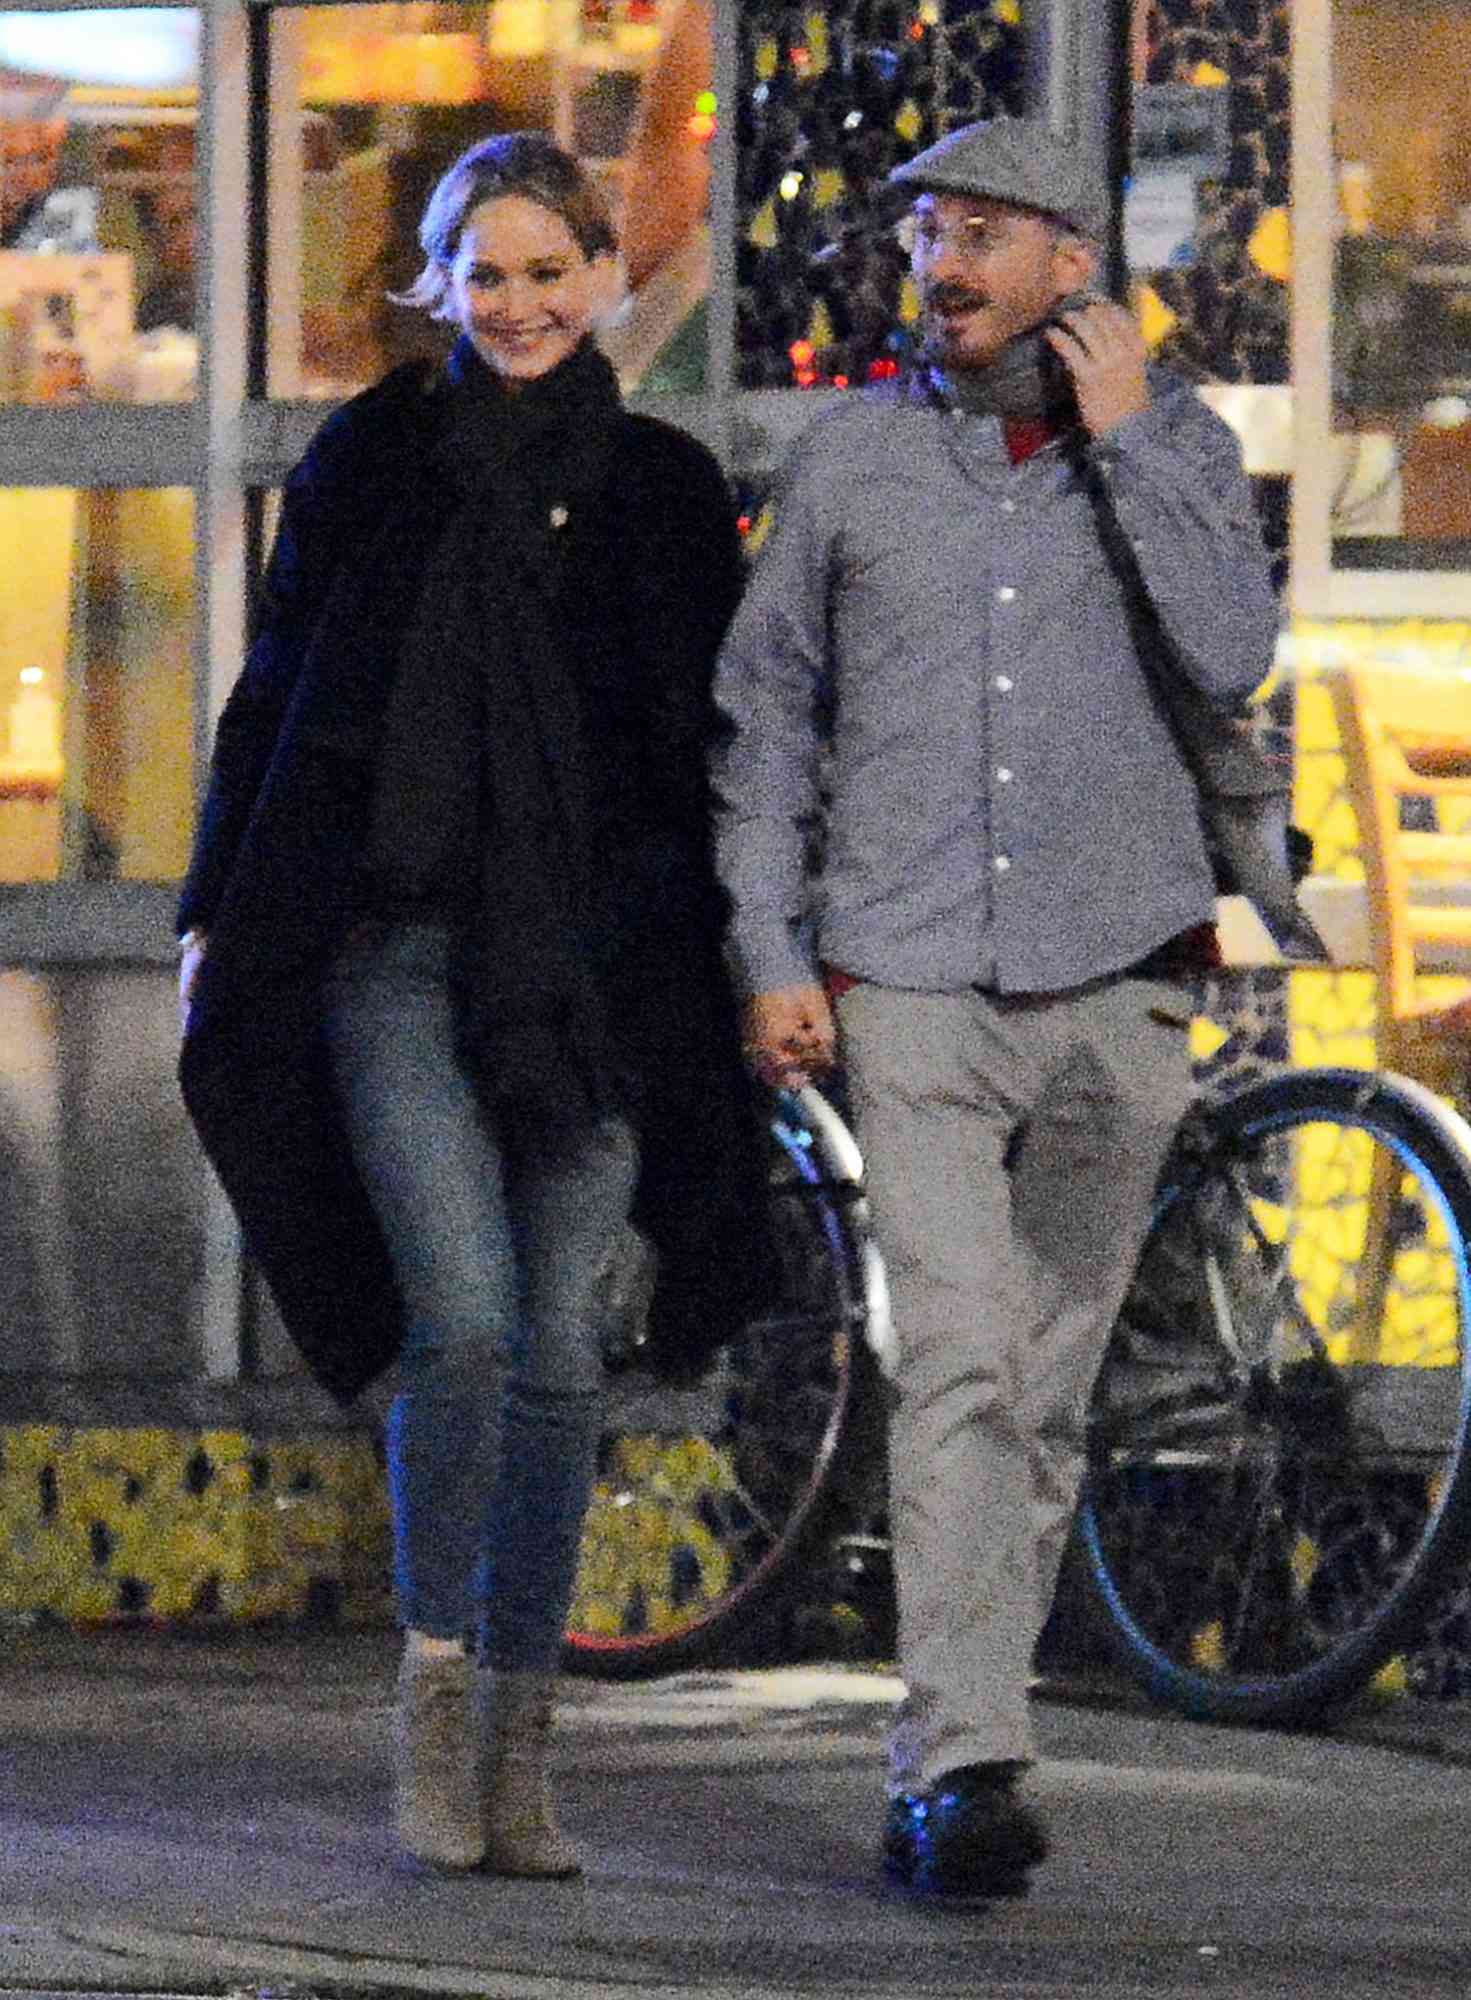 PREMIUM EXCLUSIVE: Jennifer Lawrence and Darren Aronofsky Spotted Canoodling in NYC